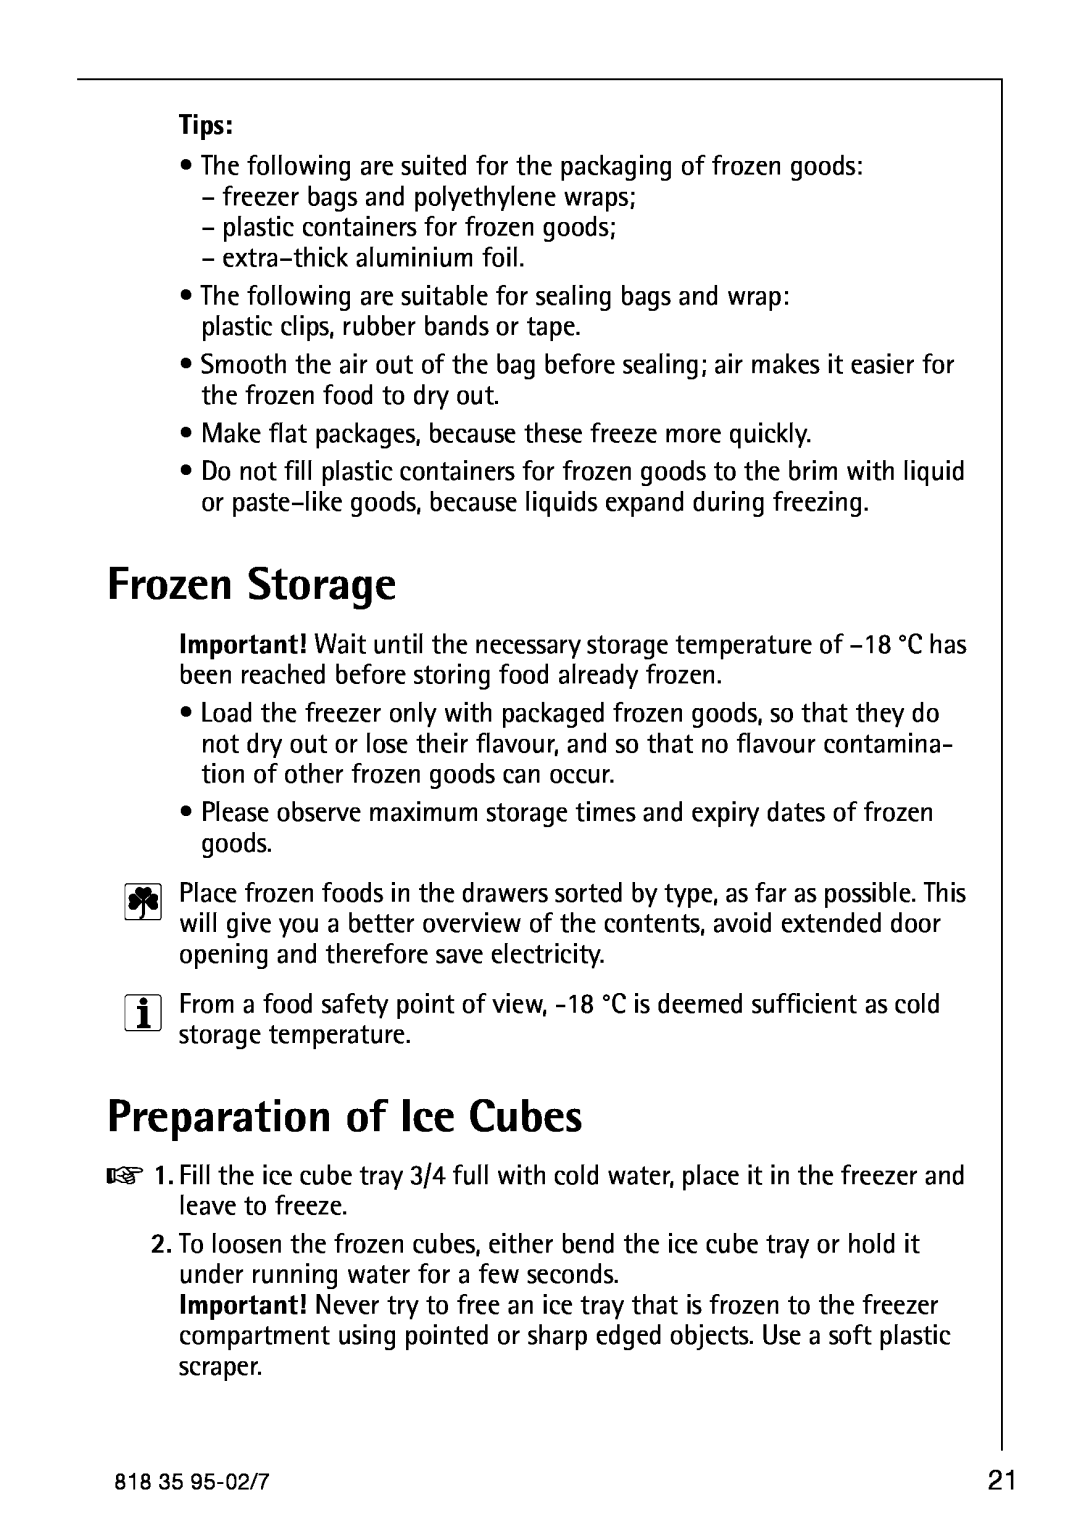 AEG S75578KG3 manual Frozen Storage, Preparation of Ice Cubes, Tips 